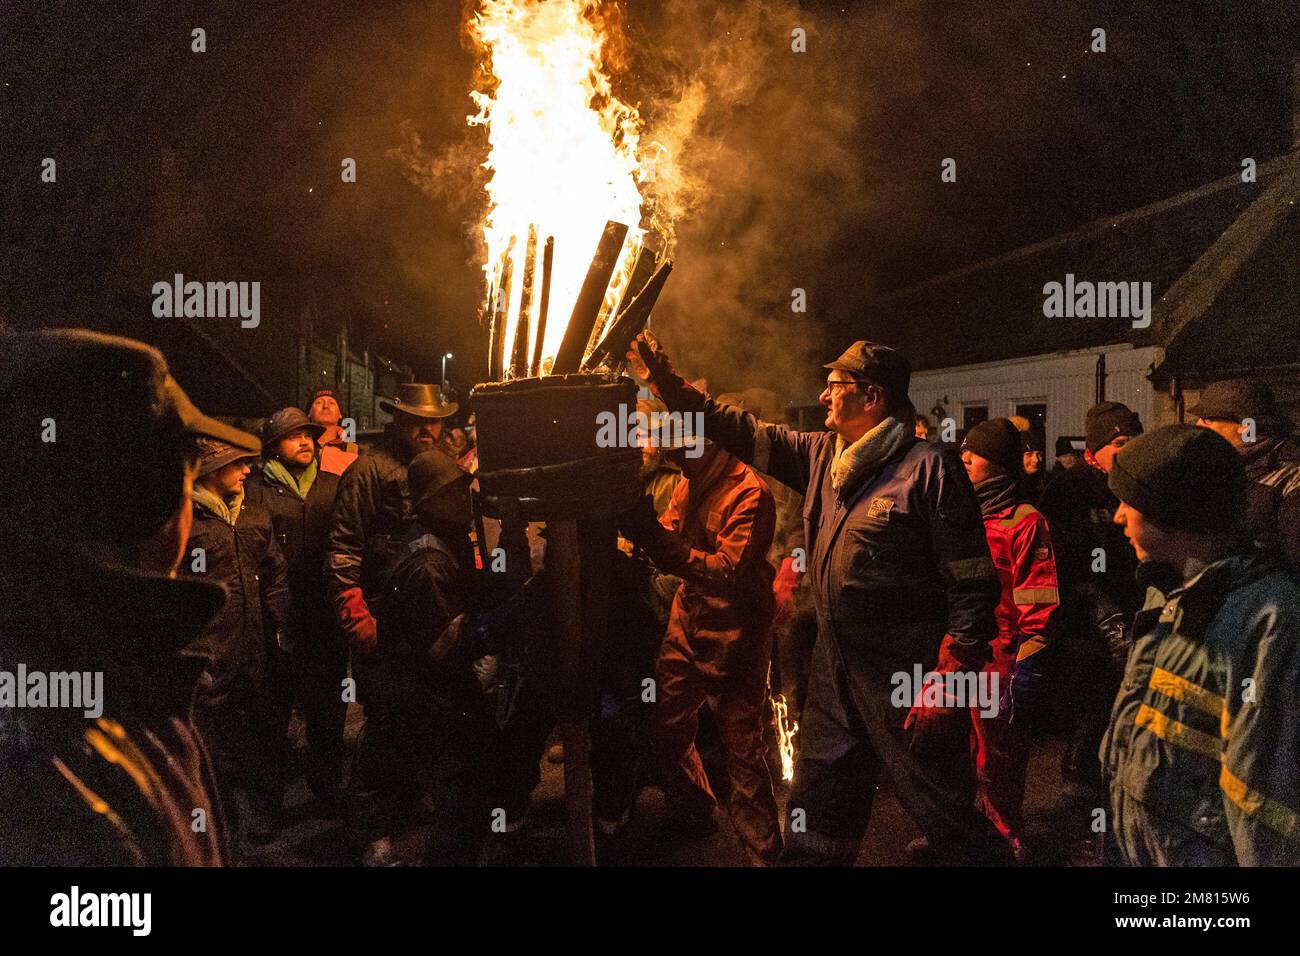 People carry a burning barrel of tar during the Burning of the Clavie, a  fire festival unique to Burghead in Moray, which greets the New Year twice,  on the 11th January and